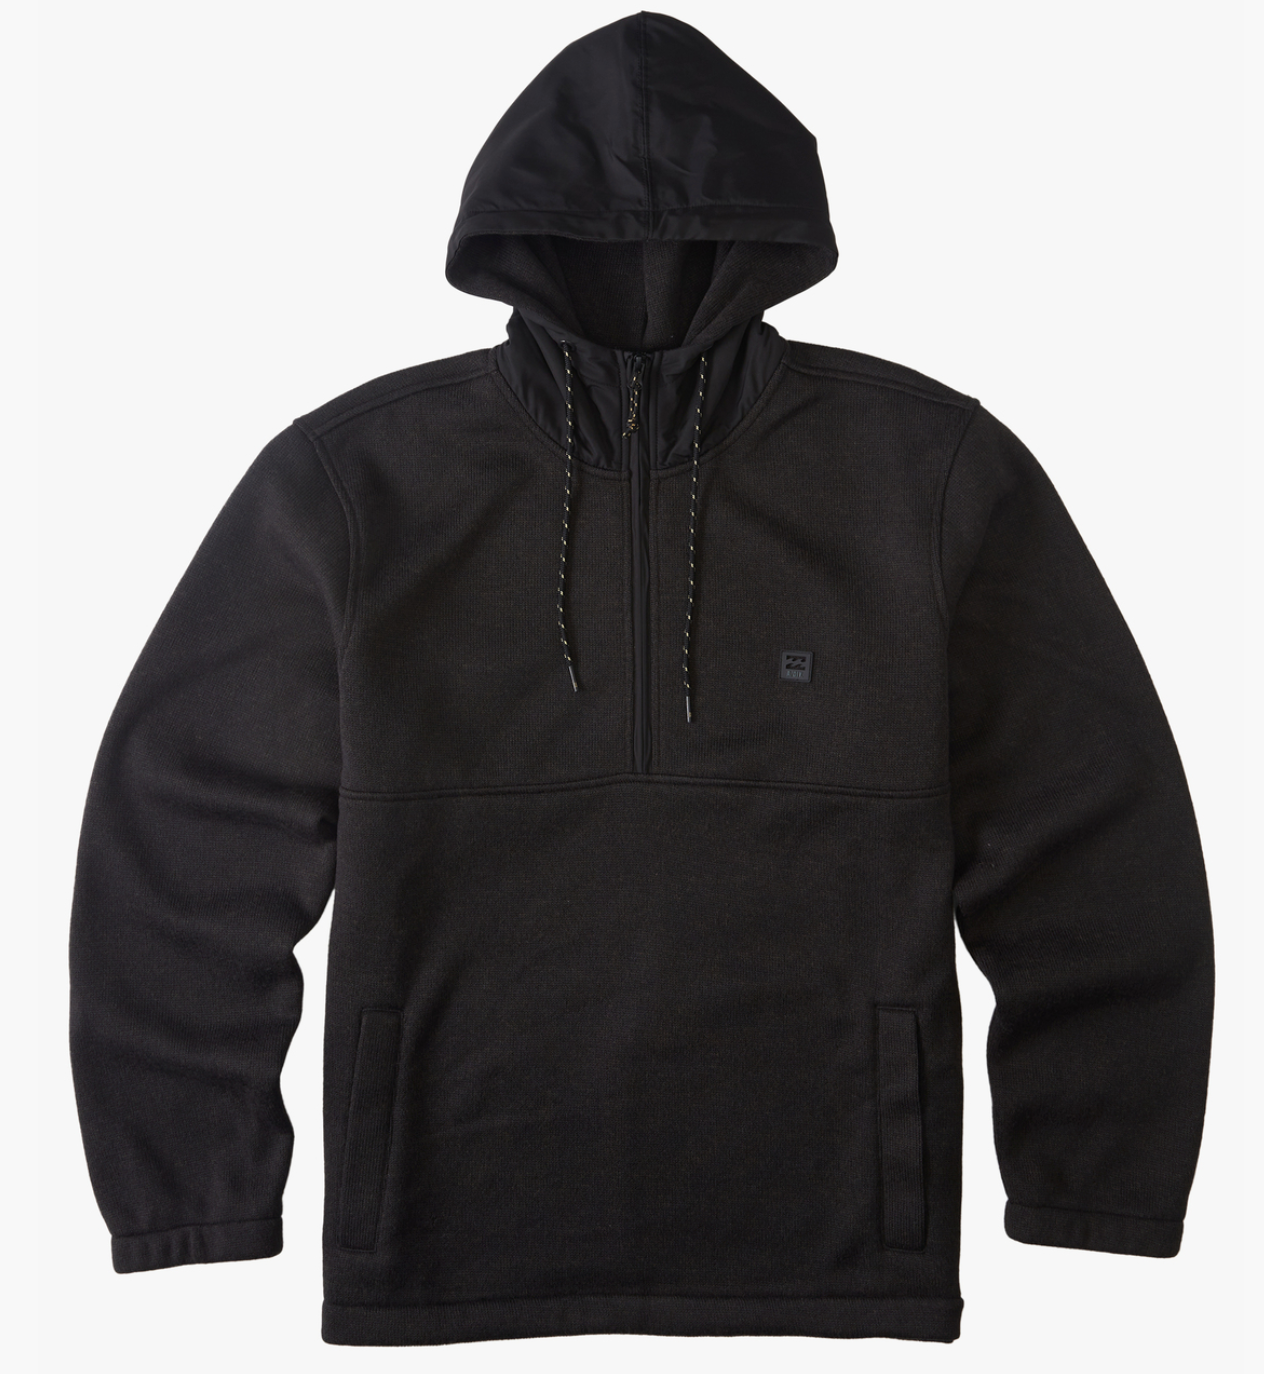 A/Div Boundary Hooded Half-Zip Pullover - Black Heather